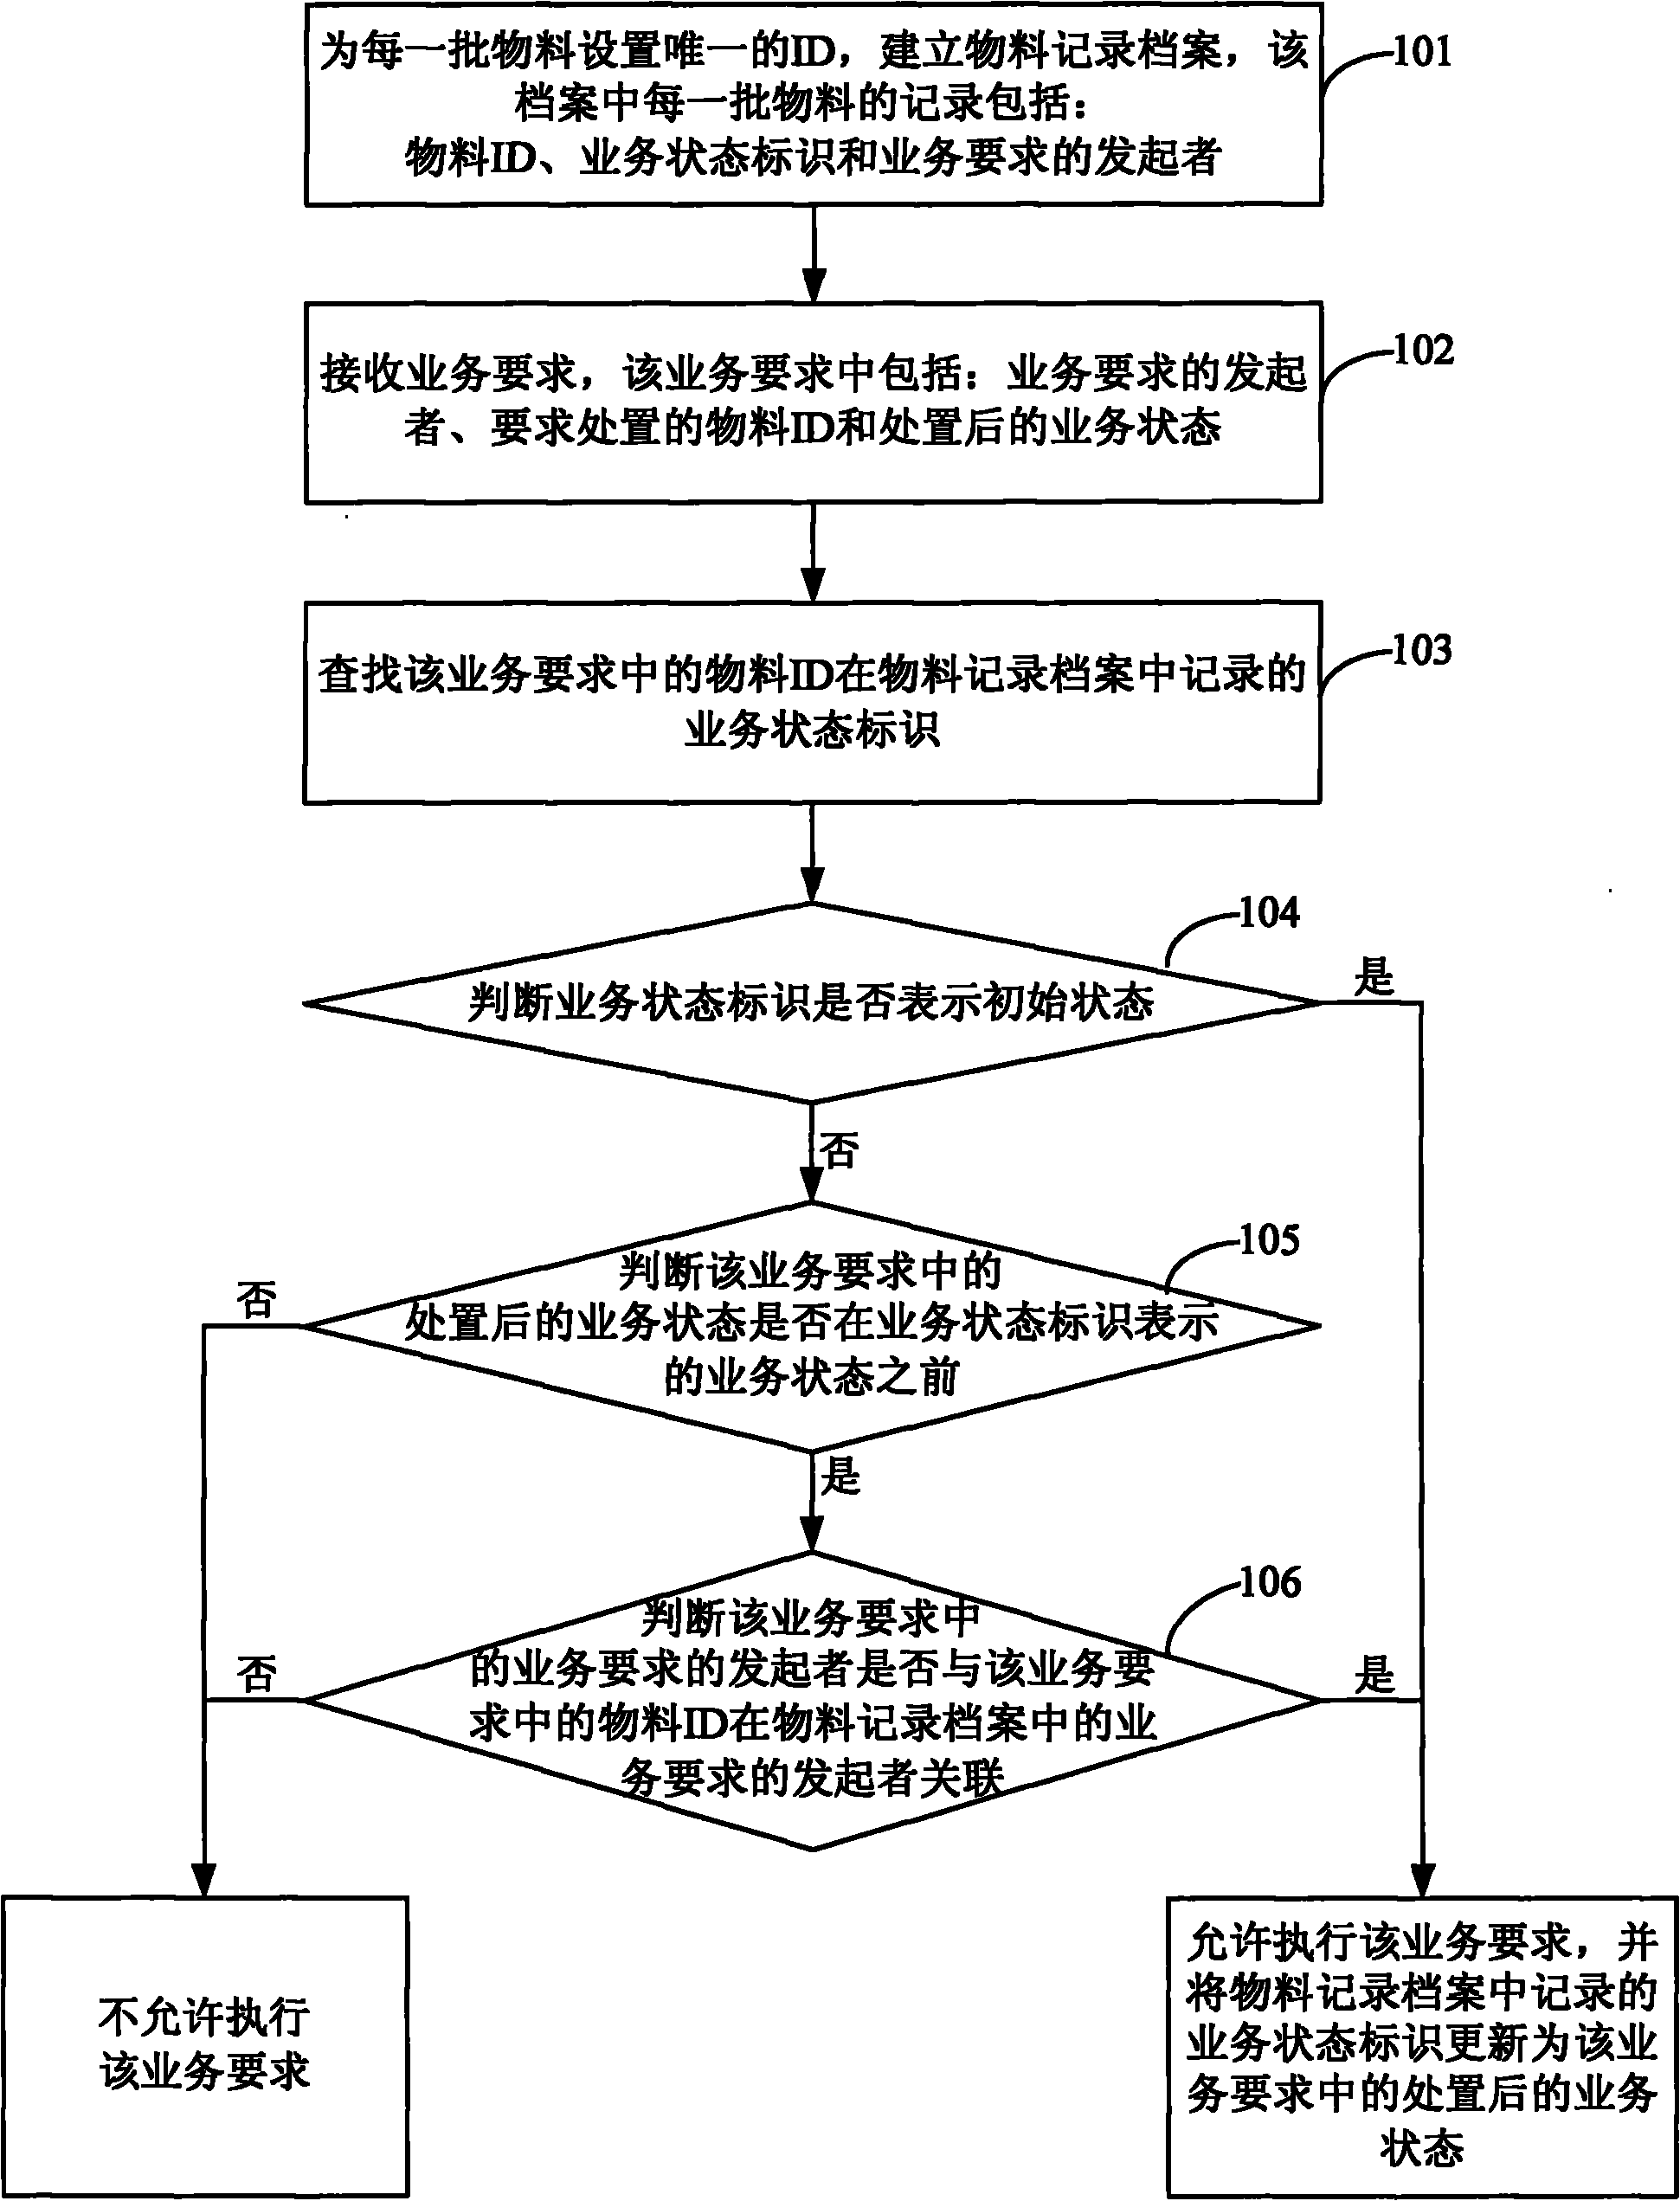 Material record data processing method and system